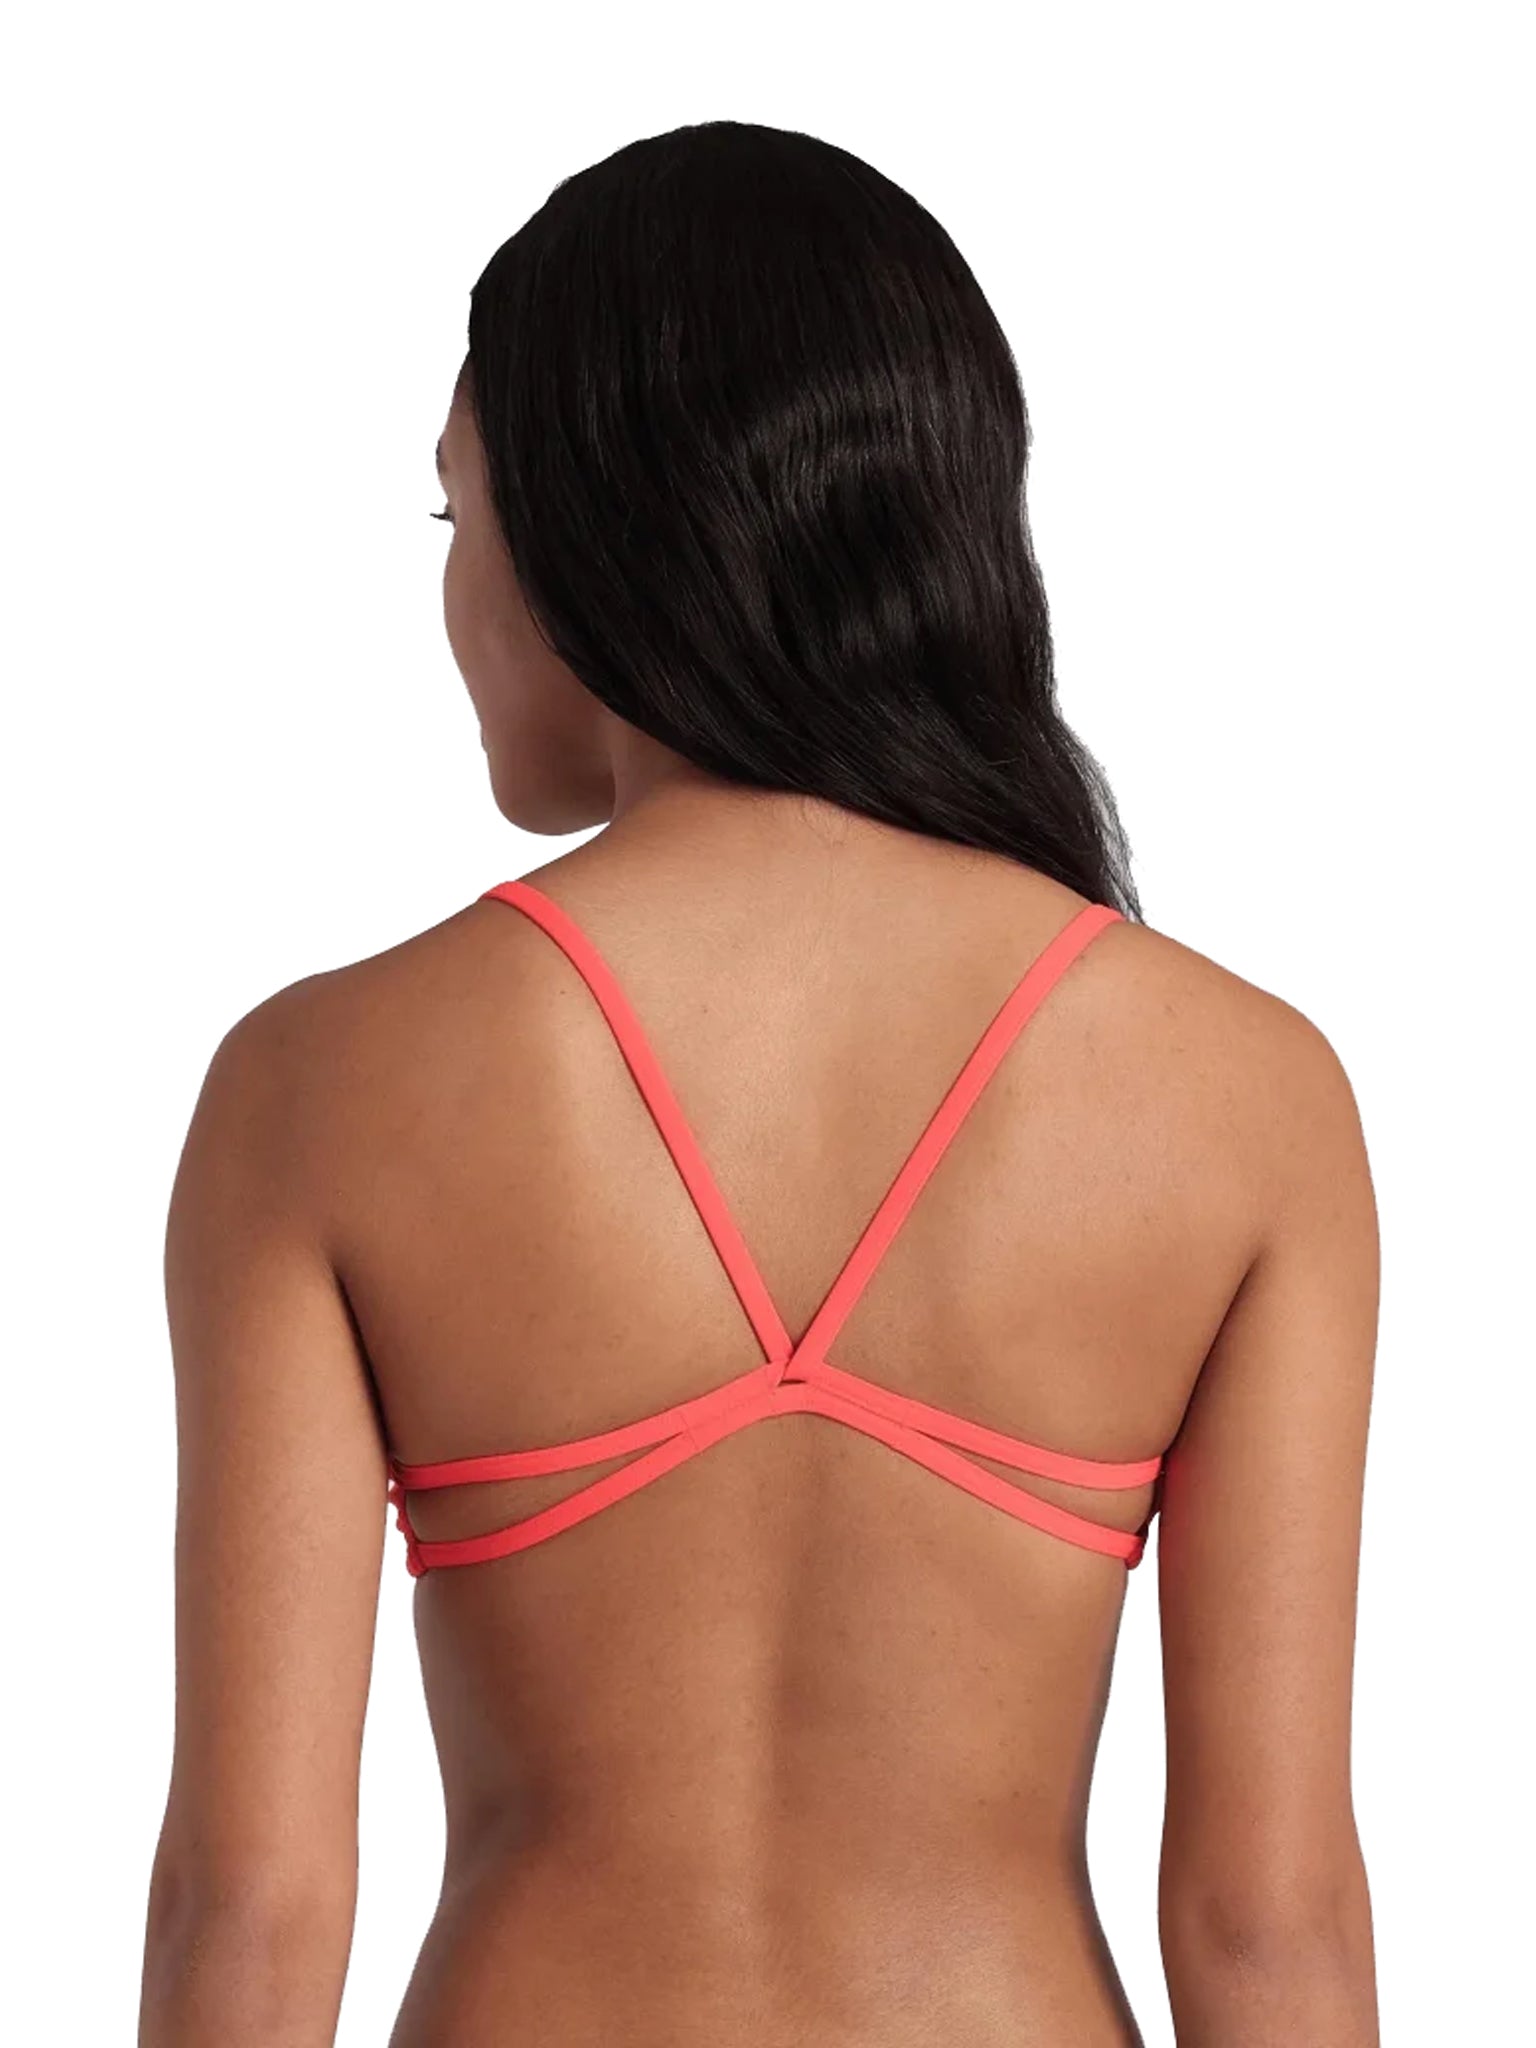 Woman&#39;s swimsuit top - Bandeau Play